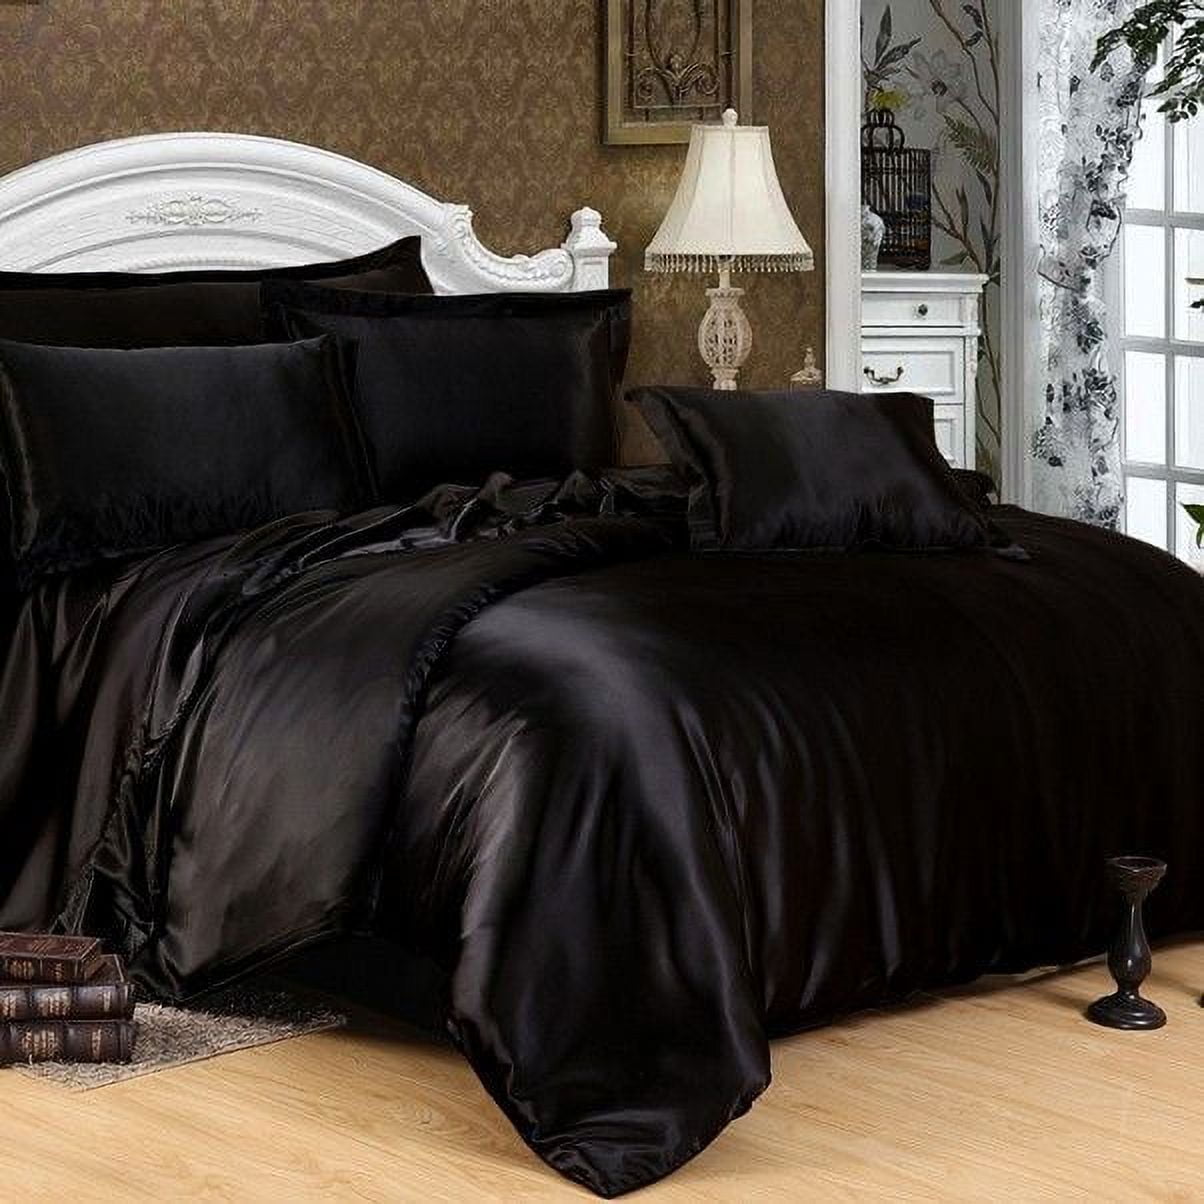 Reviewers Love This $16 Bedding Because It's 'so Soft and Smooth